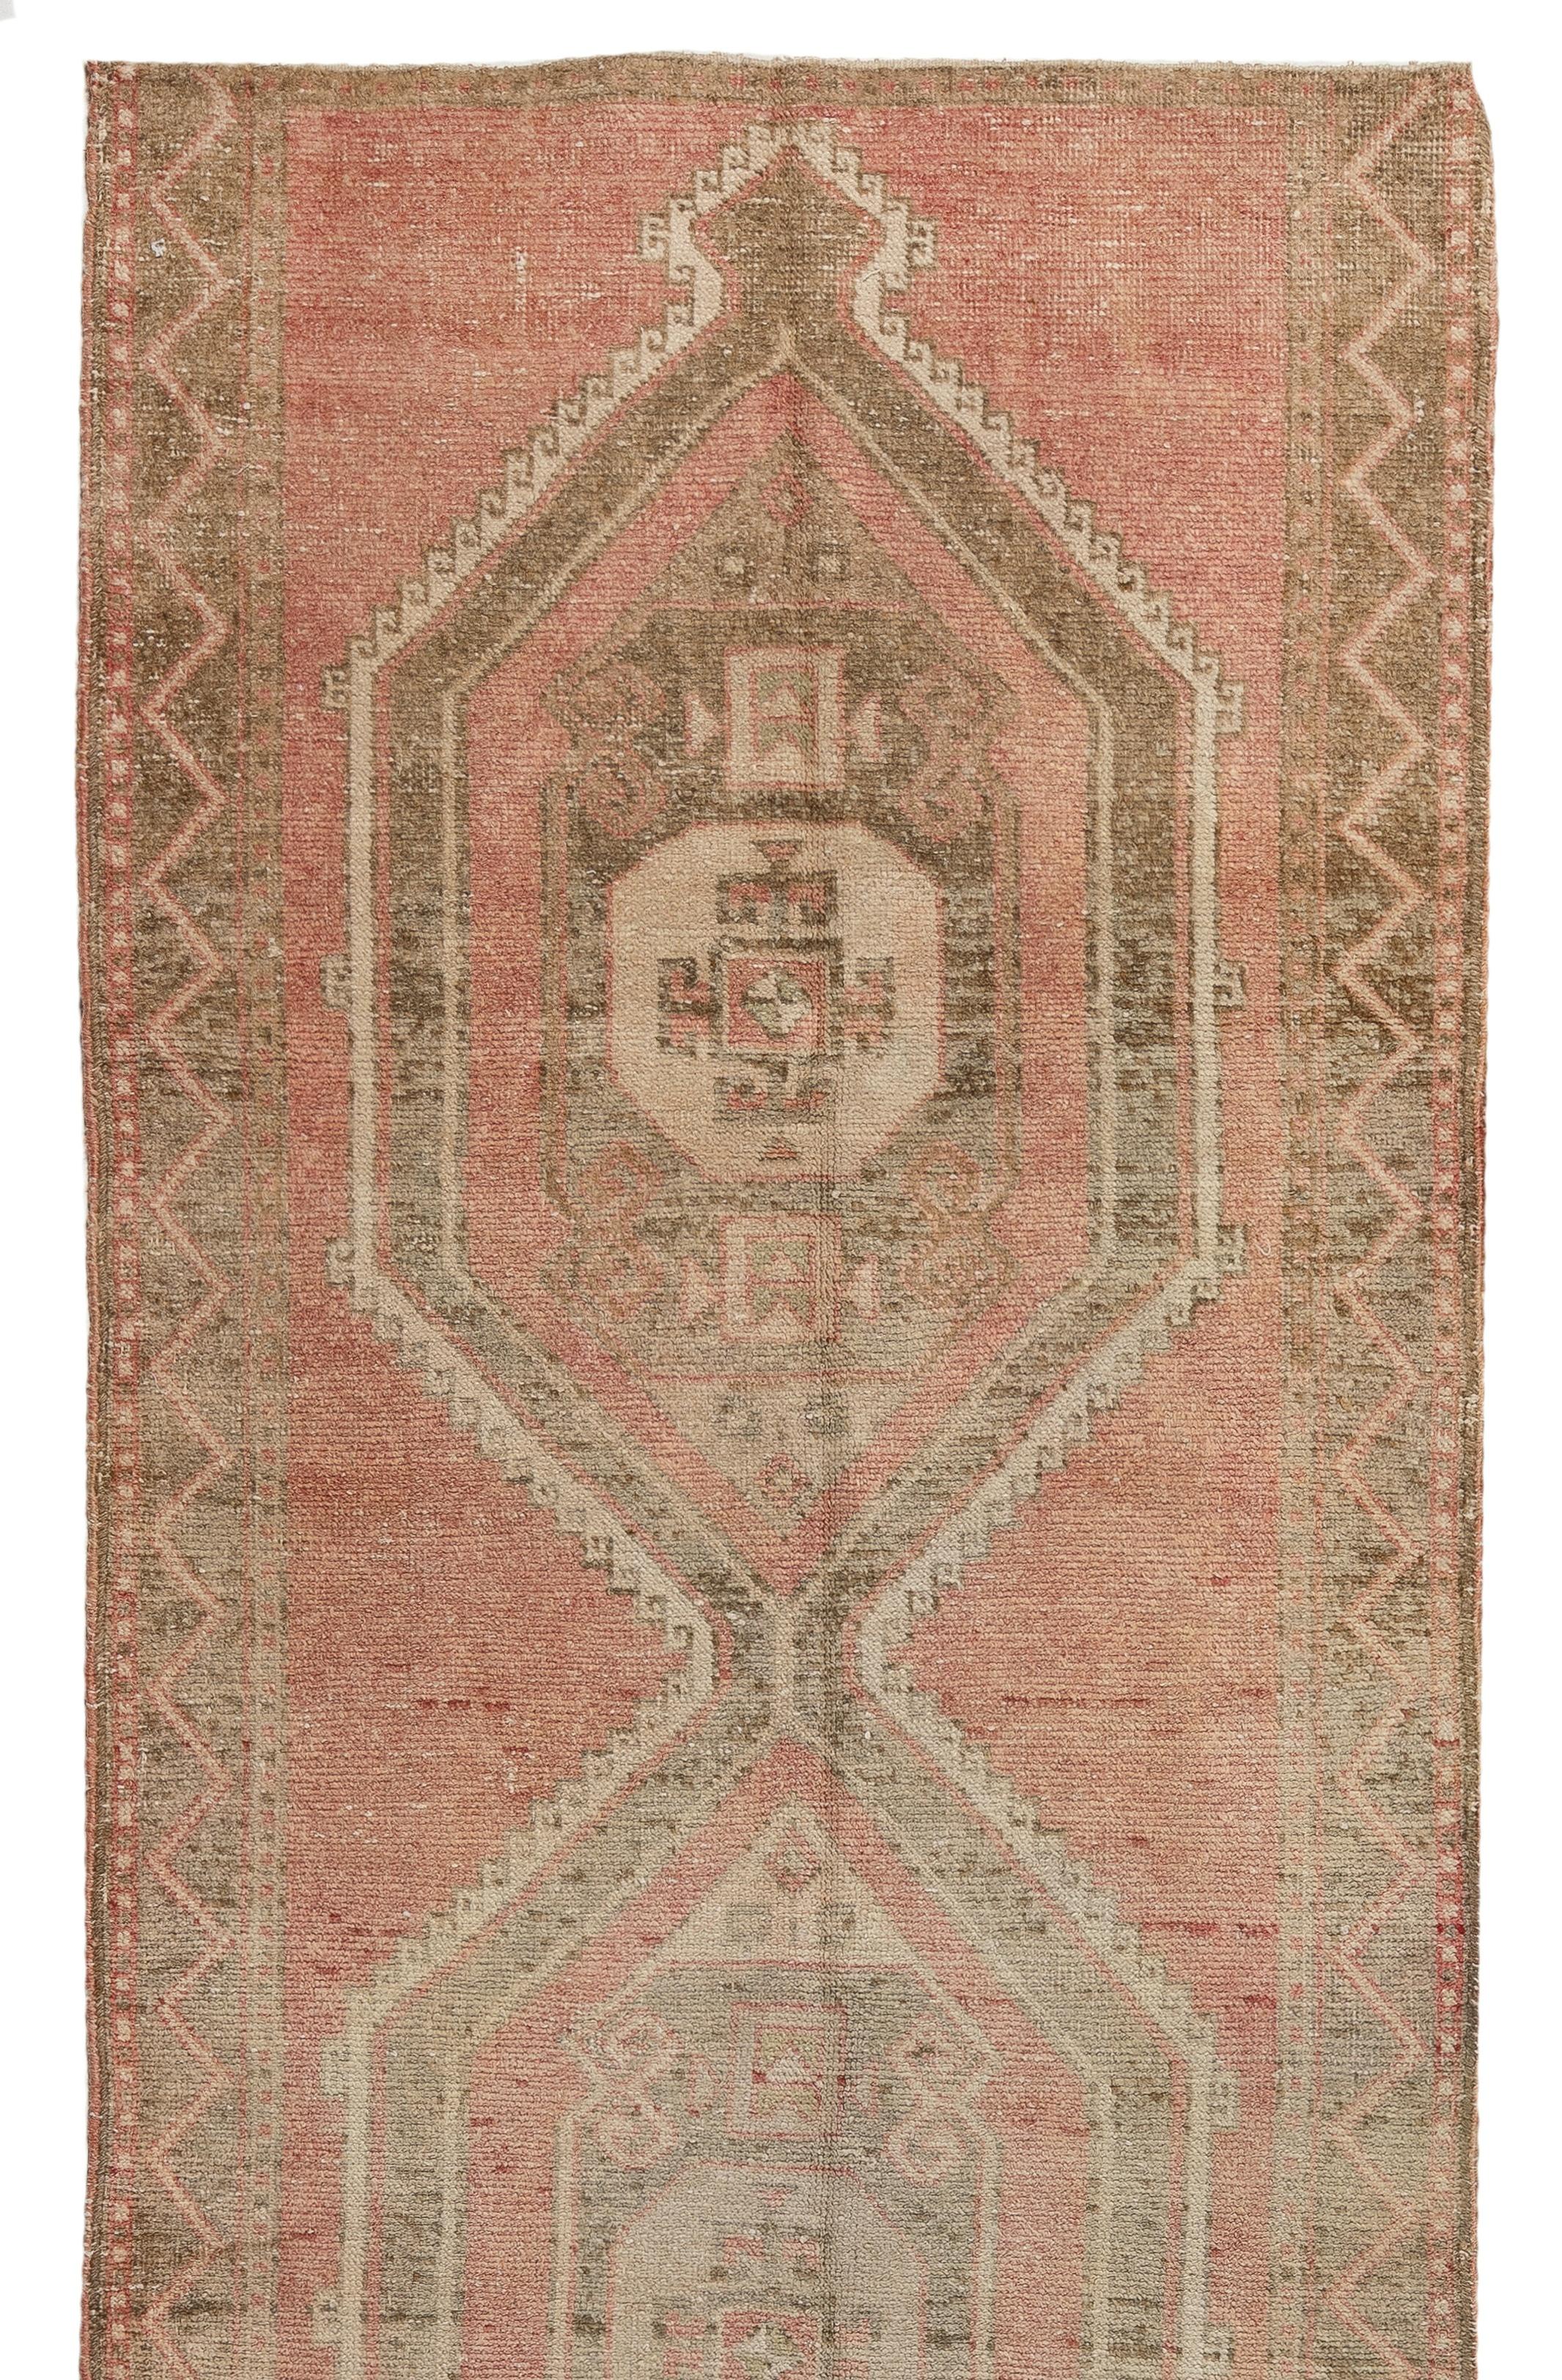 This vintage hand-knotted runner rug was made in Central Turkey in the 1960s. It is made of medium wool pile on wool foundation and features a geometric design in soft colors. It has been washed professionally, The rug is sturdy and can be used in